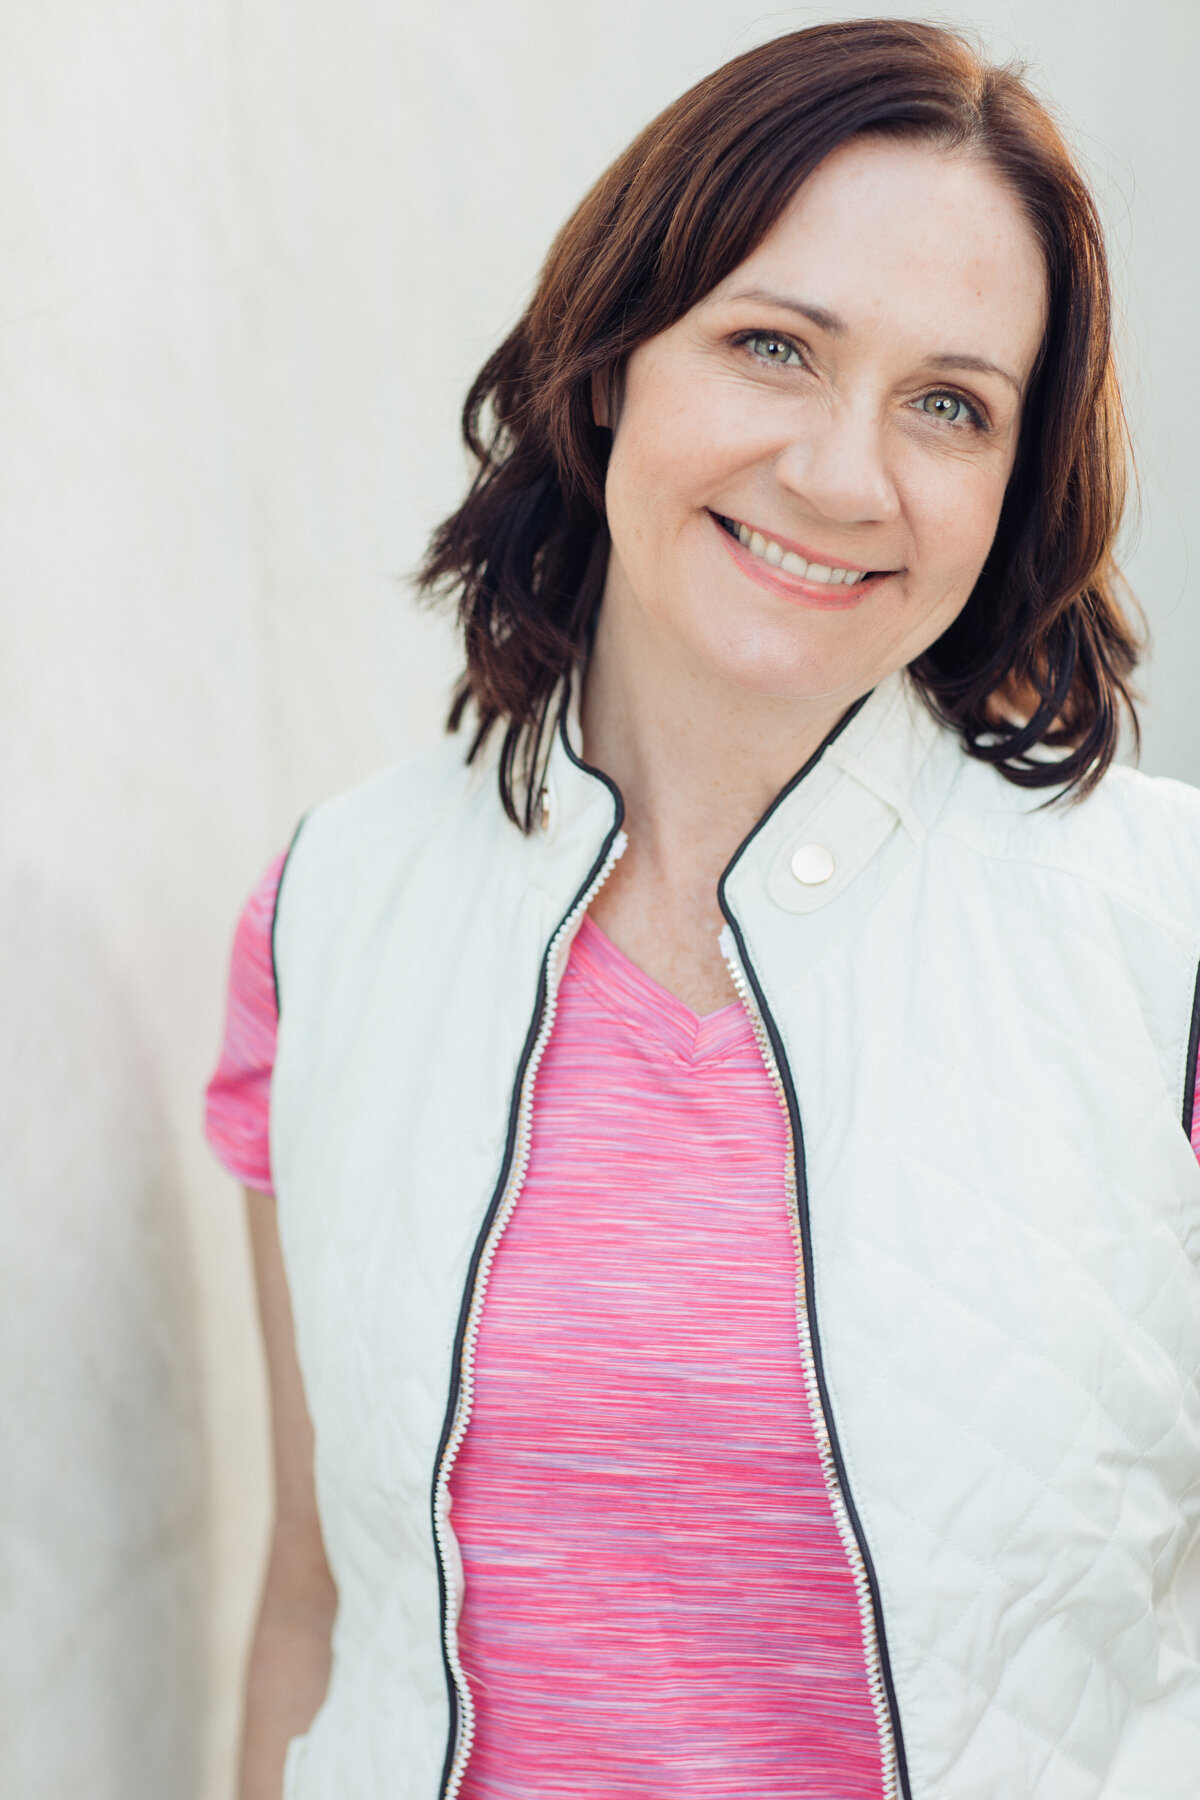 Headshot Photograph Of Woman In Outer White Vest  And Inner Pink Shirt Los Angeles